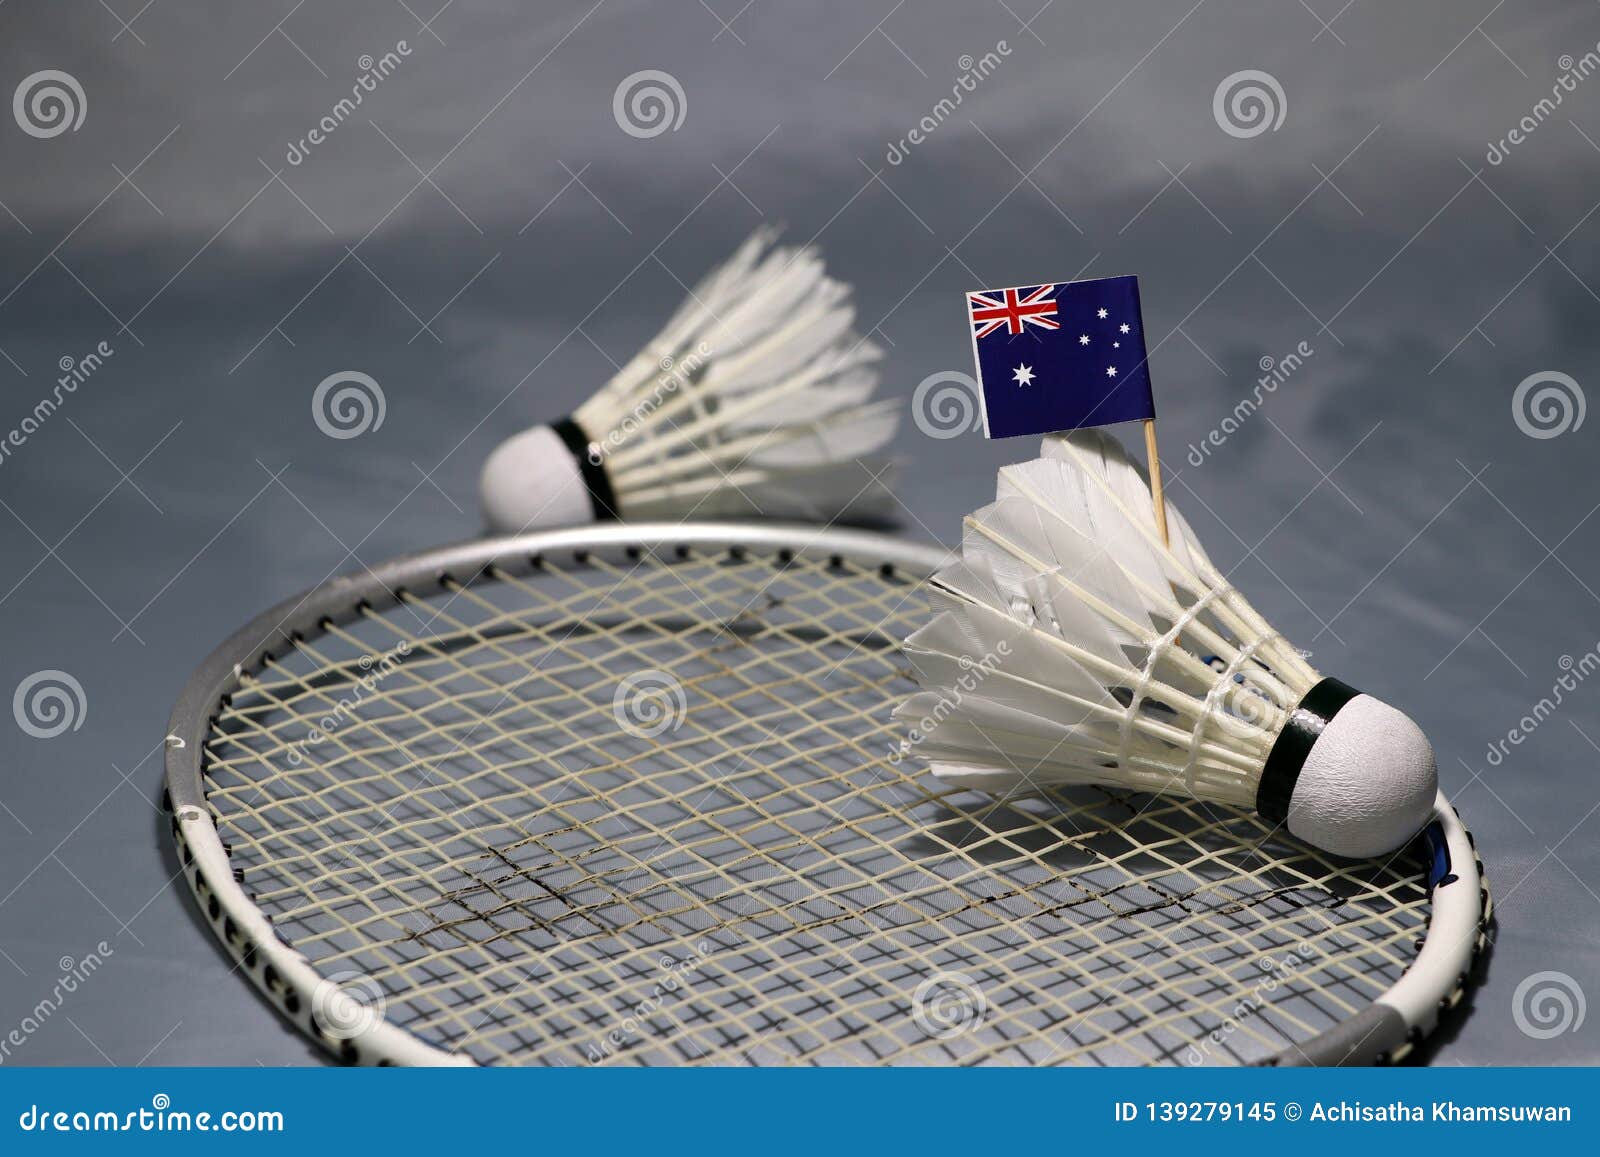 Mini Australia Flag Stick on the Shuttlecock Put on the Net of Badminton Racket and Out Focus a Shuttlecock Stock Image